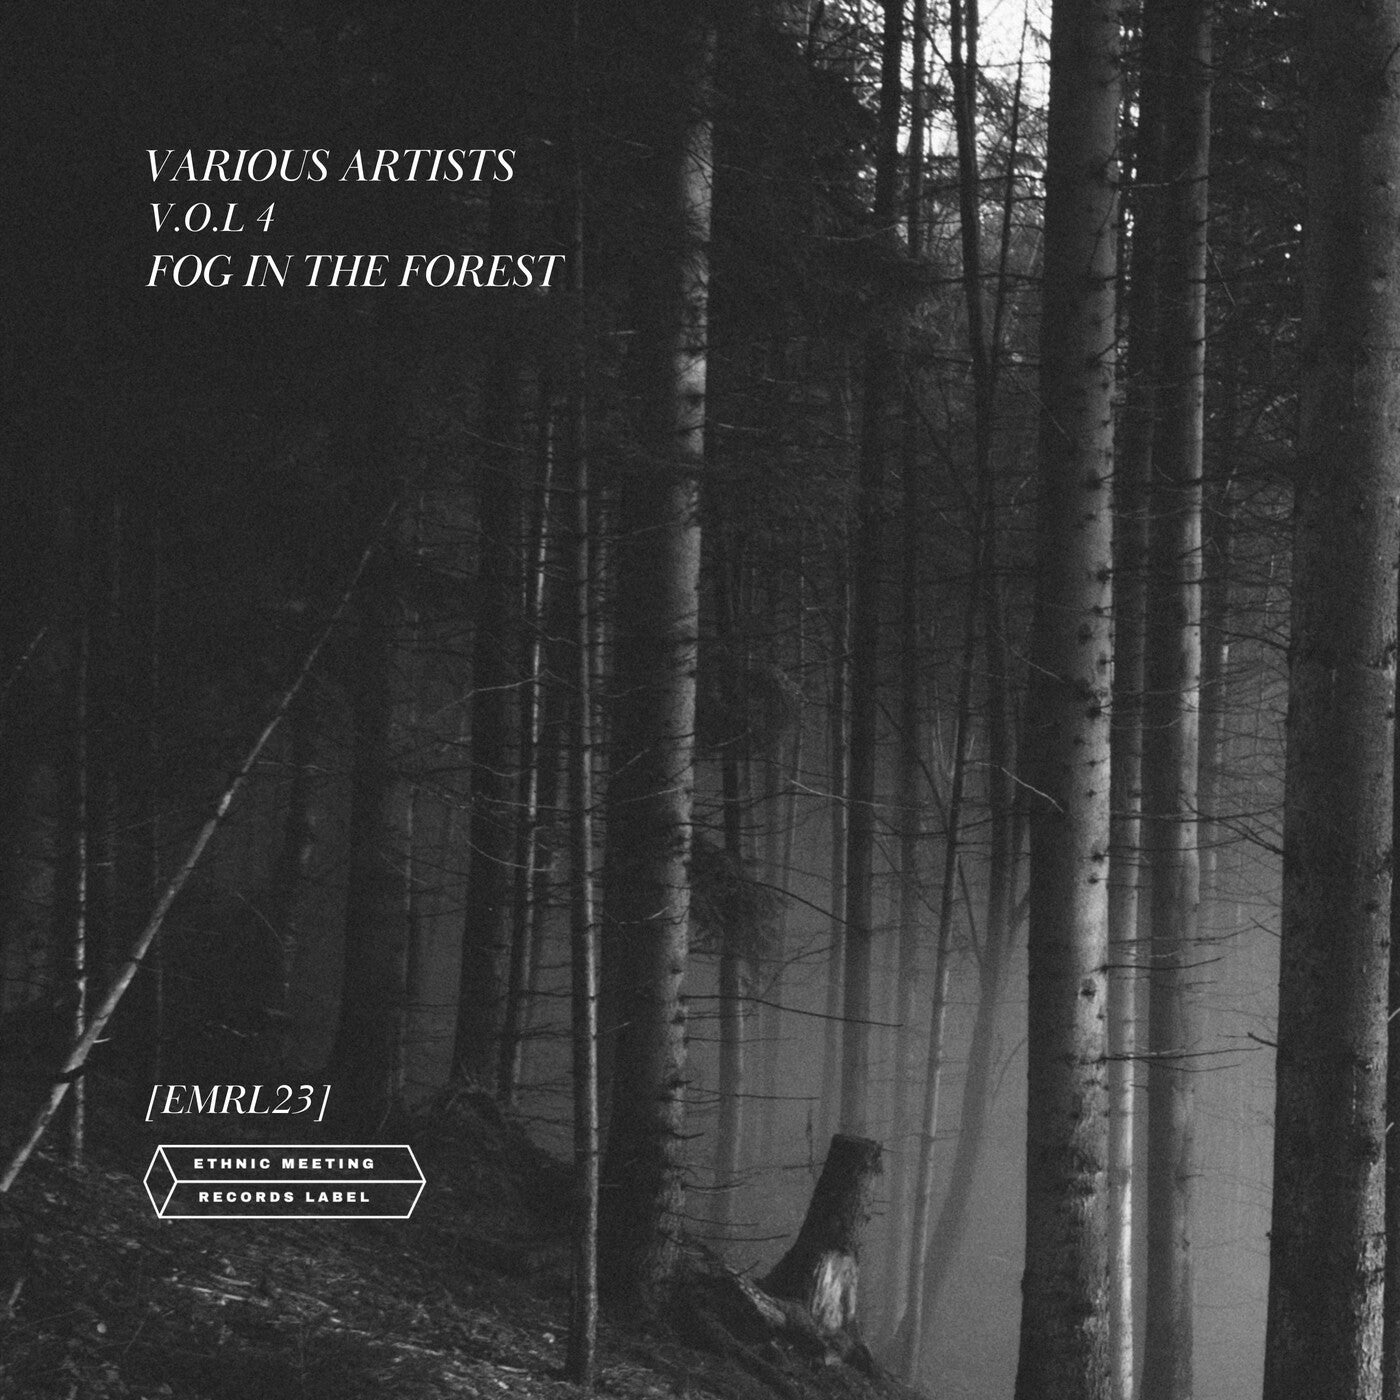 V.a Vol. 4 Fog in the Forest